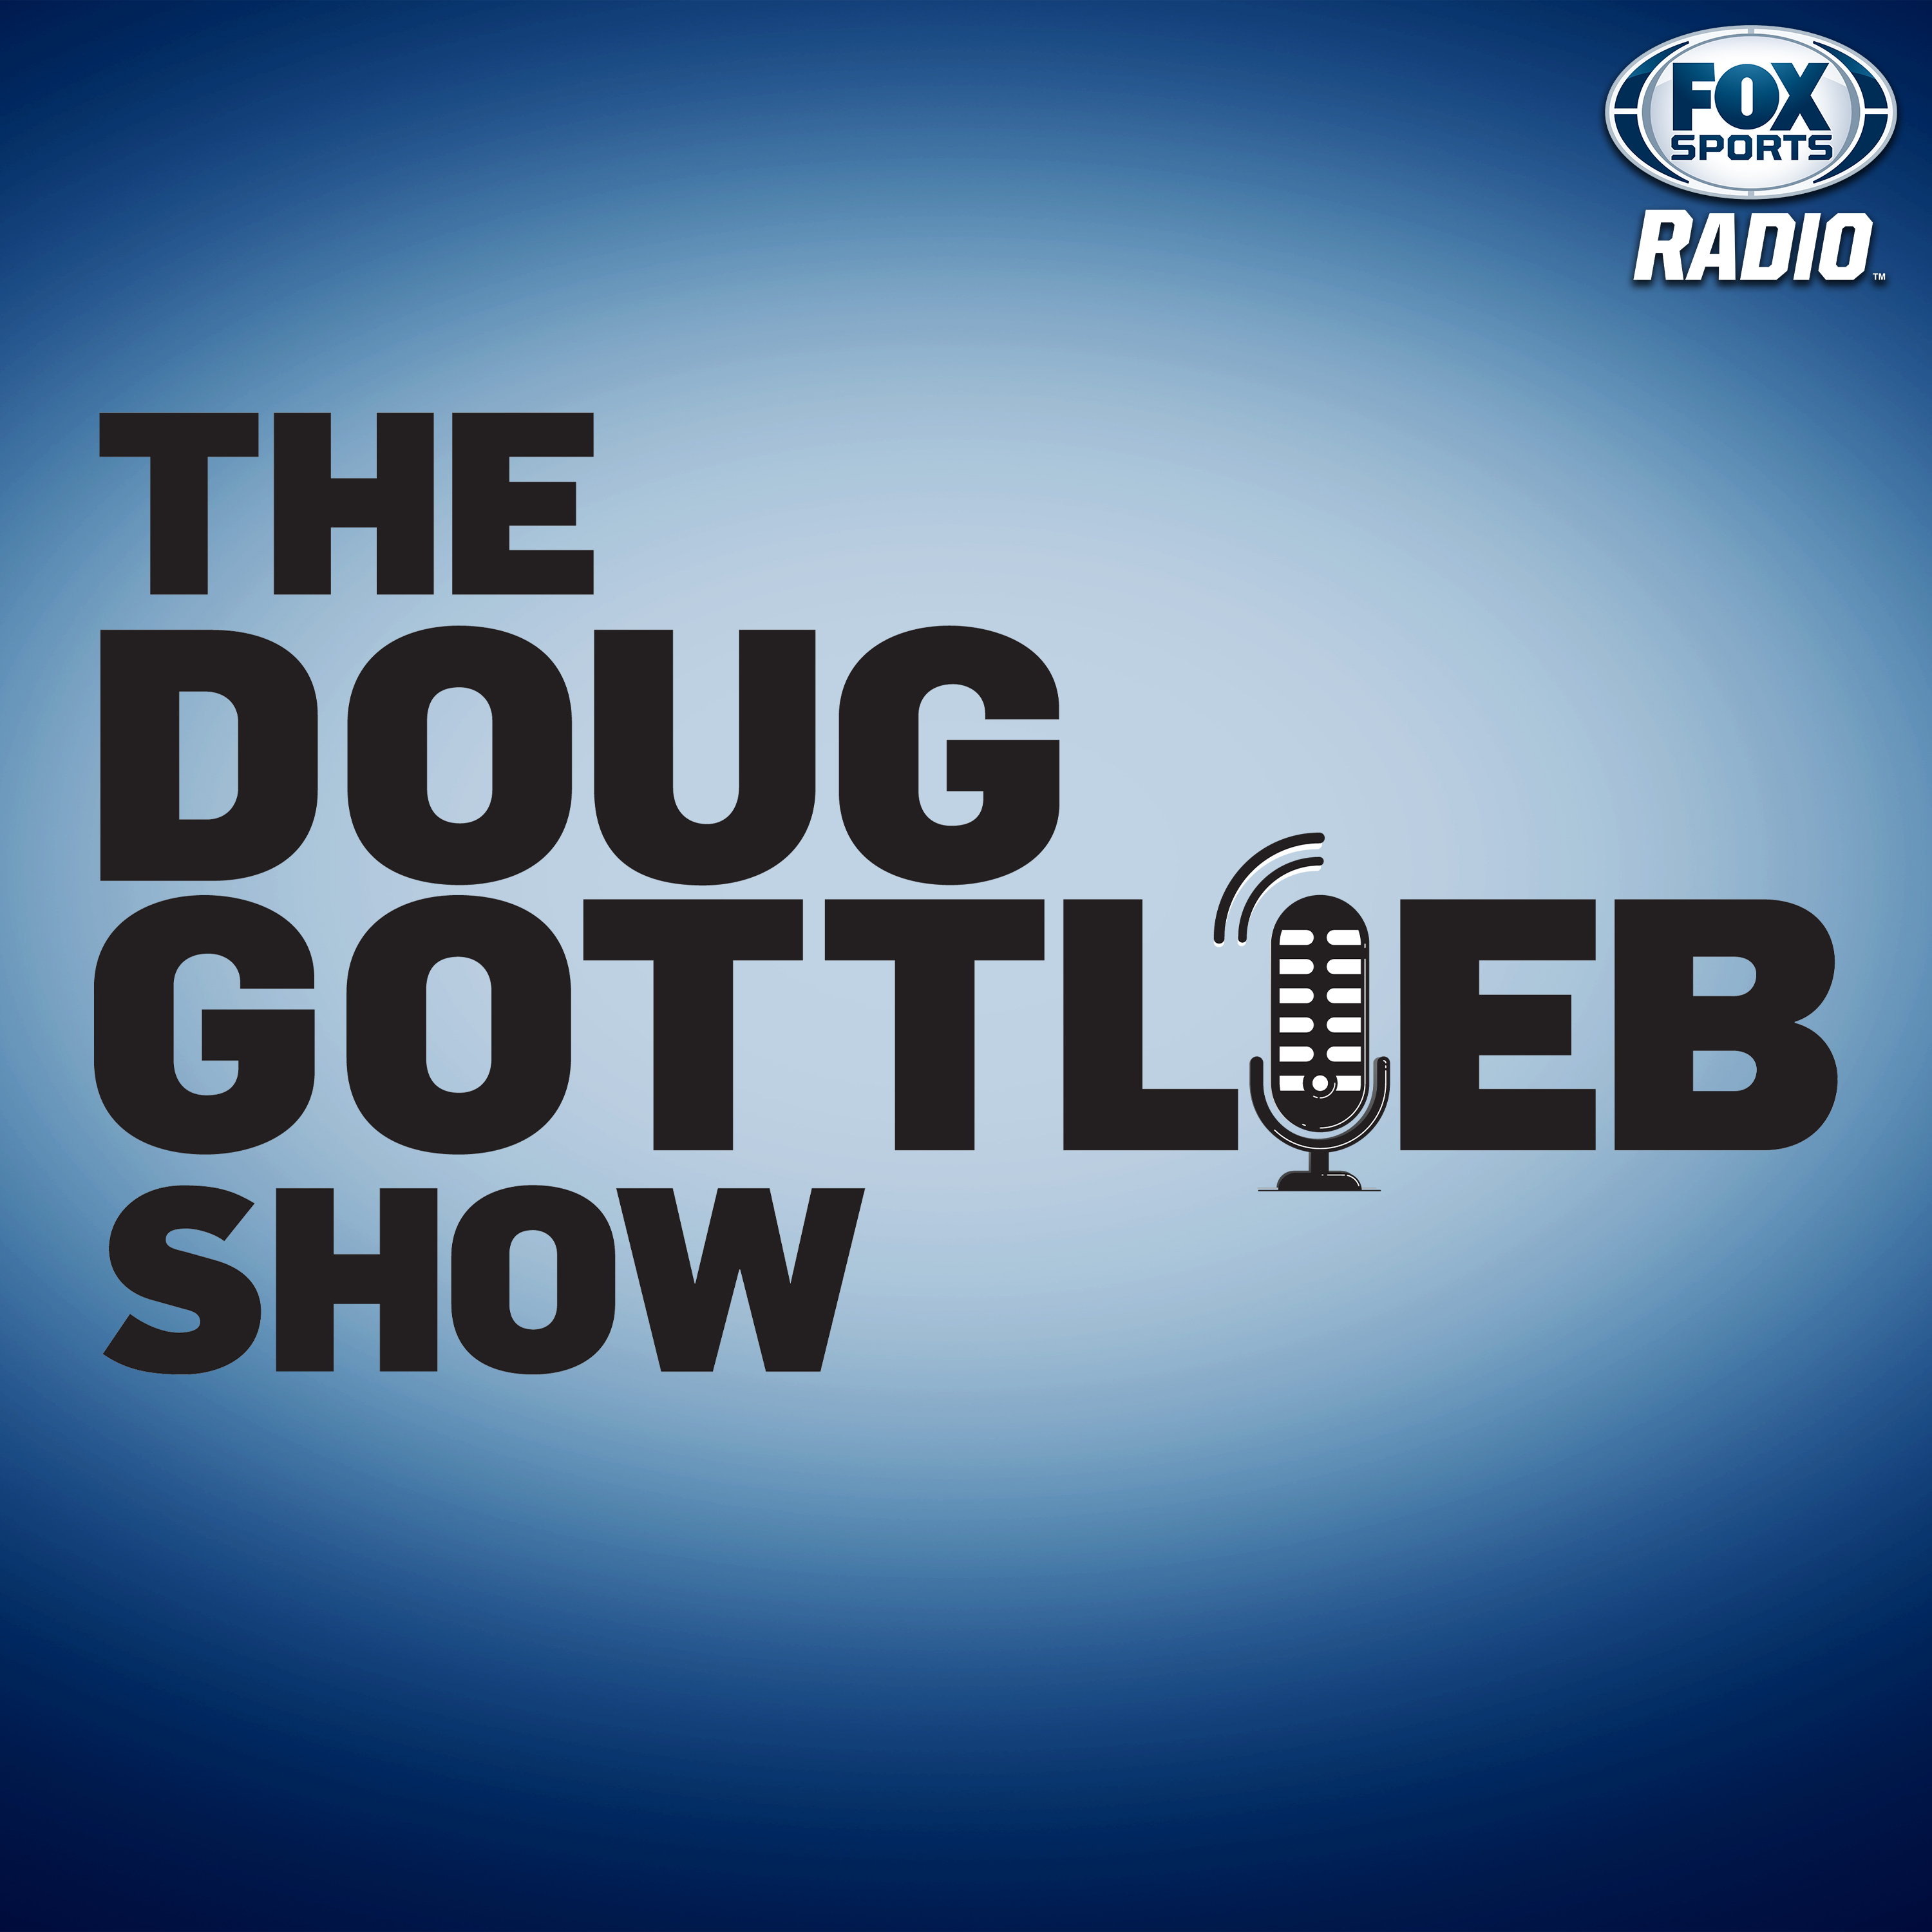 THE BEST OF THE DOUG GOTTLEB SHOW